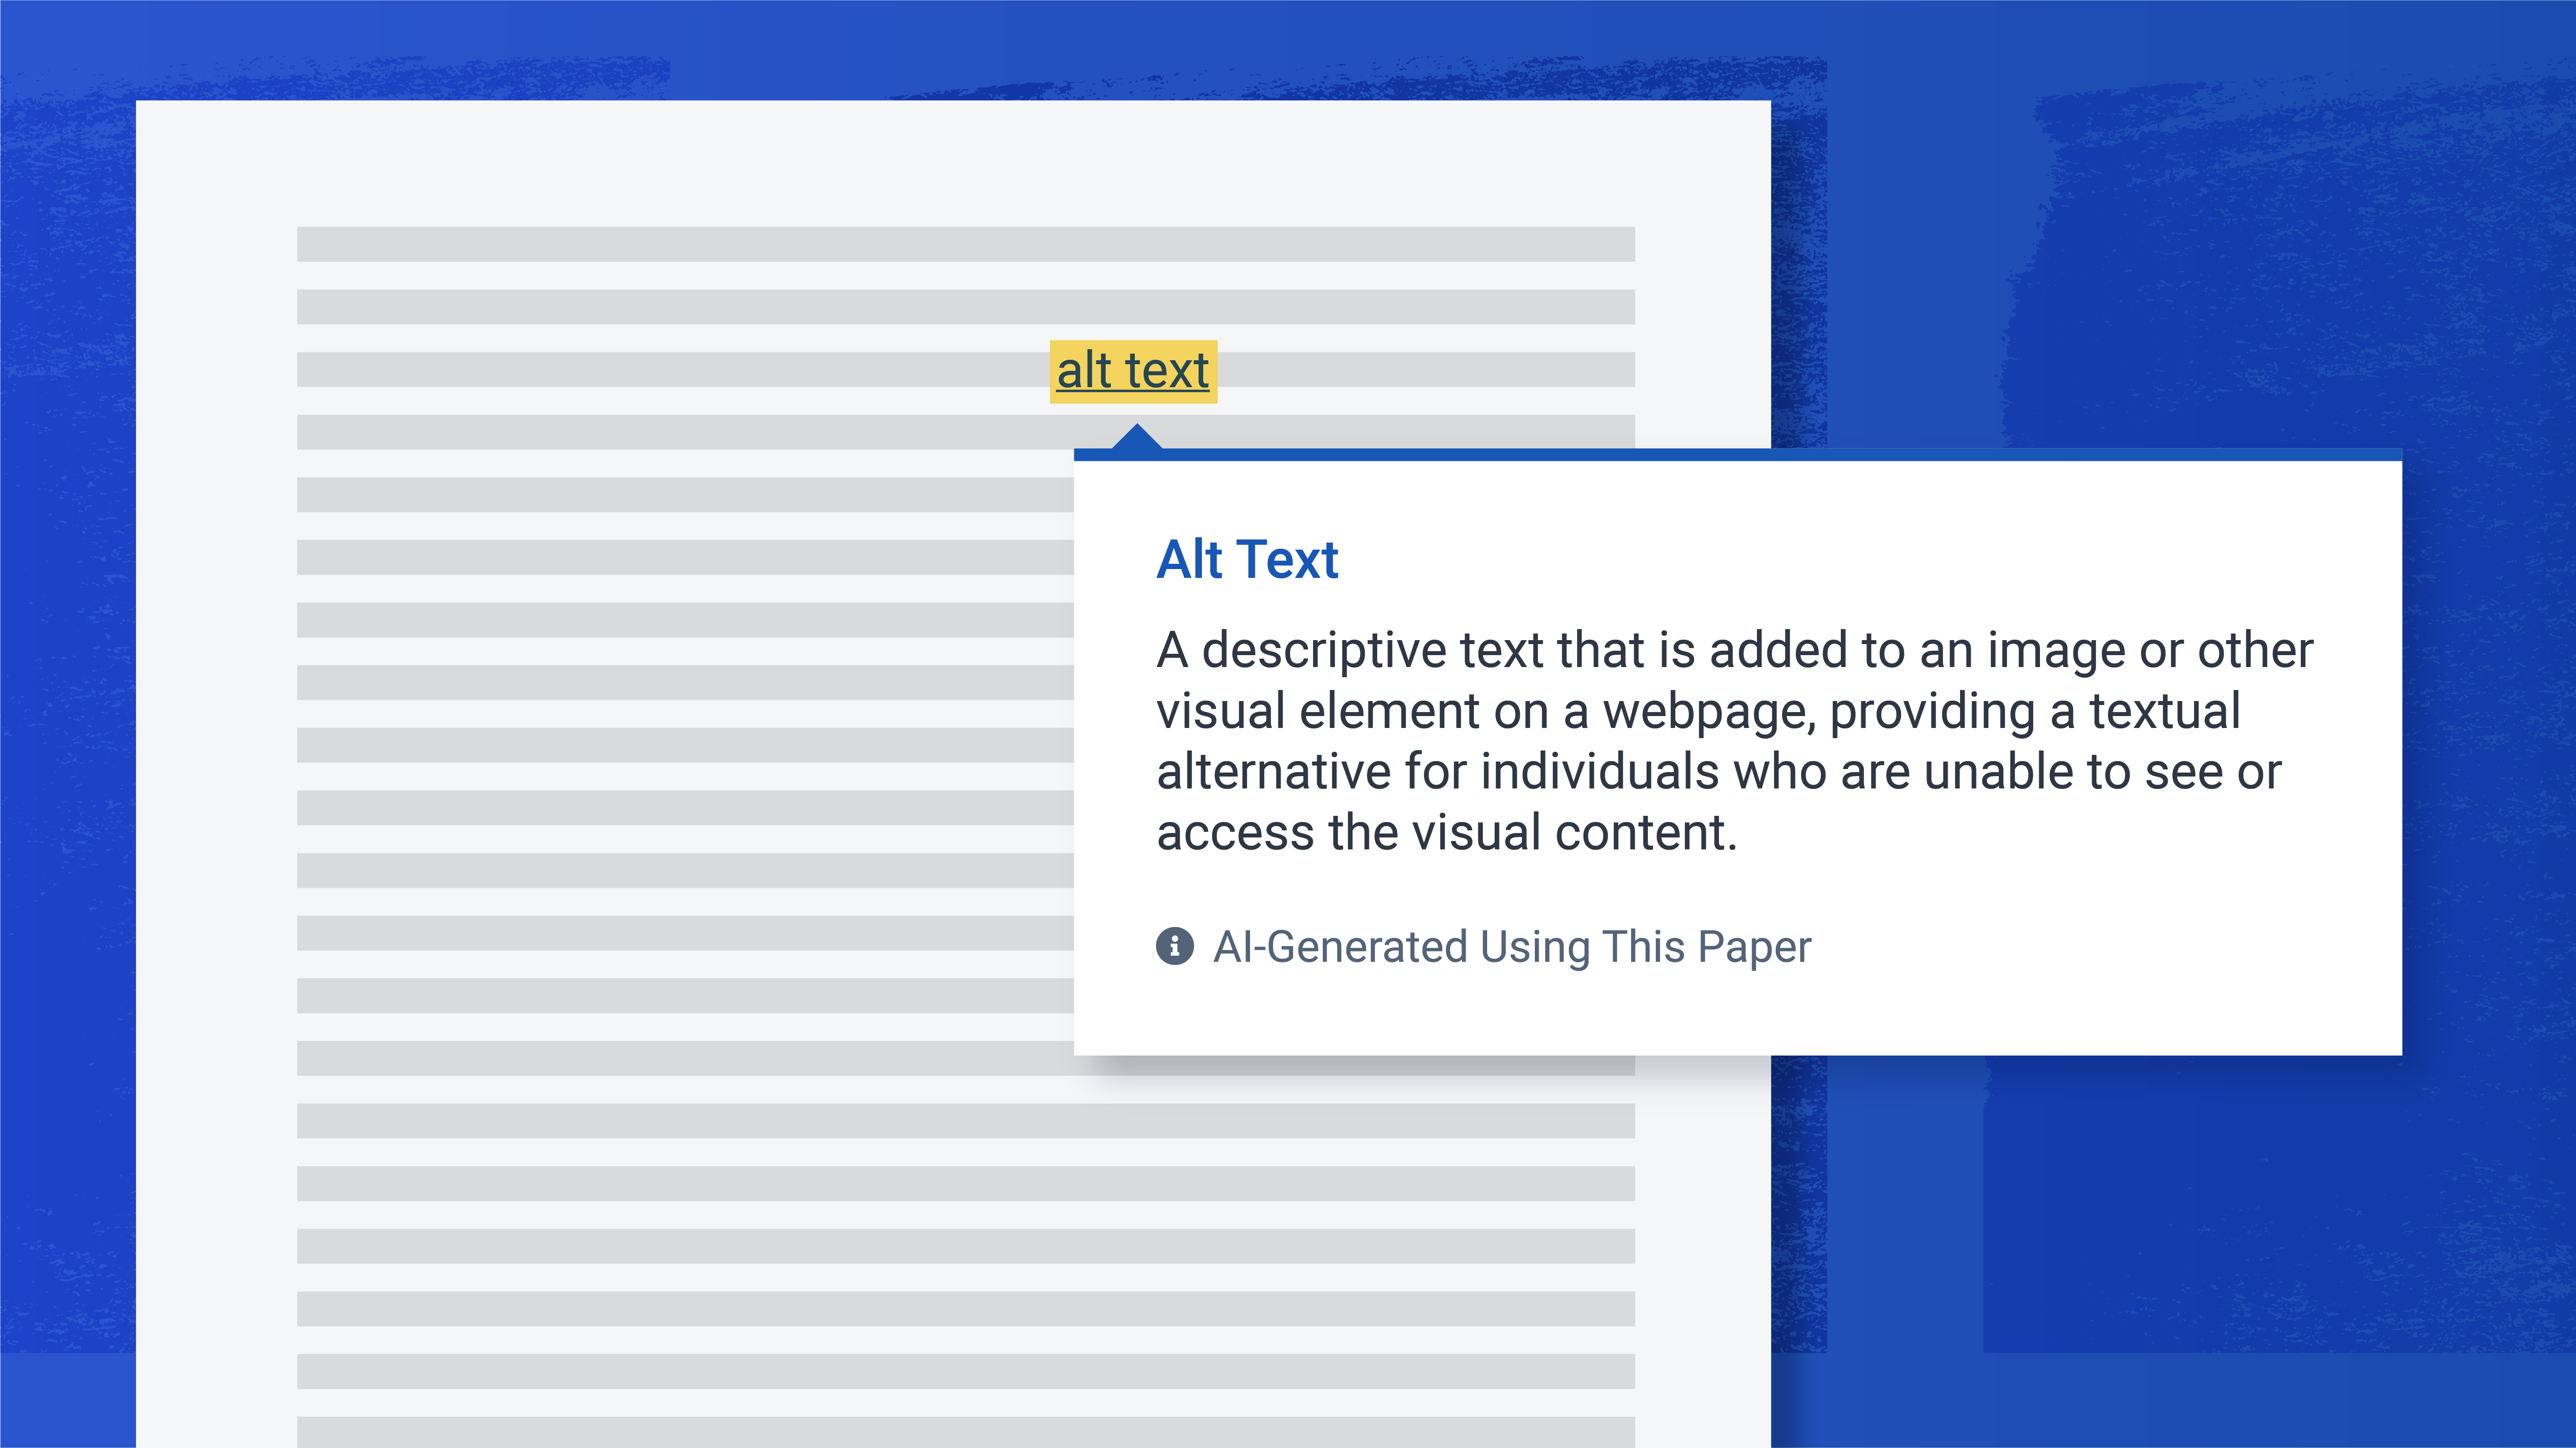 A paper with the term "alt text" highlighted. Below the highlighted text, a popover shows text reading "Alt Text: A descriptive text that is added to an image or other visual element on a webpage, providing a textual alternative for individuals who are unable to see or access the visual content." In separate grey text below the definition there is a note that says "AI-Generated Using This Paper"